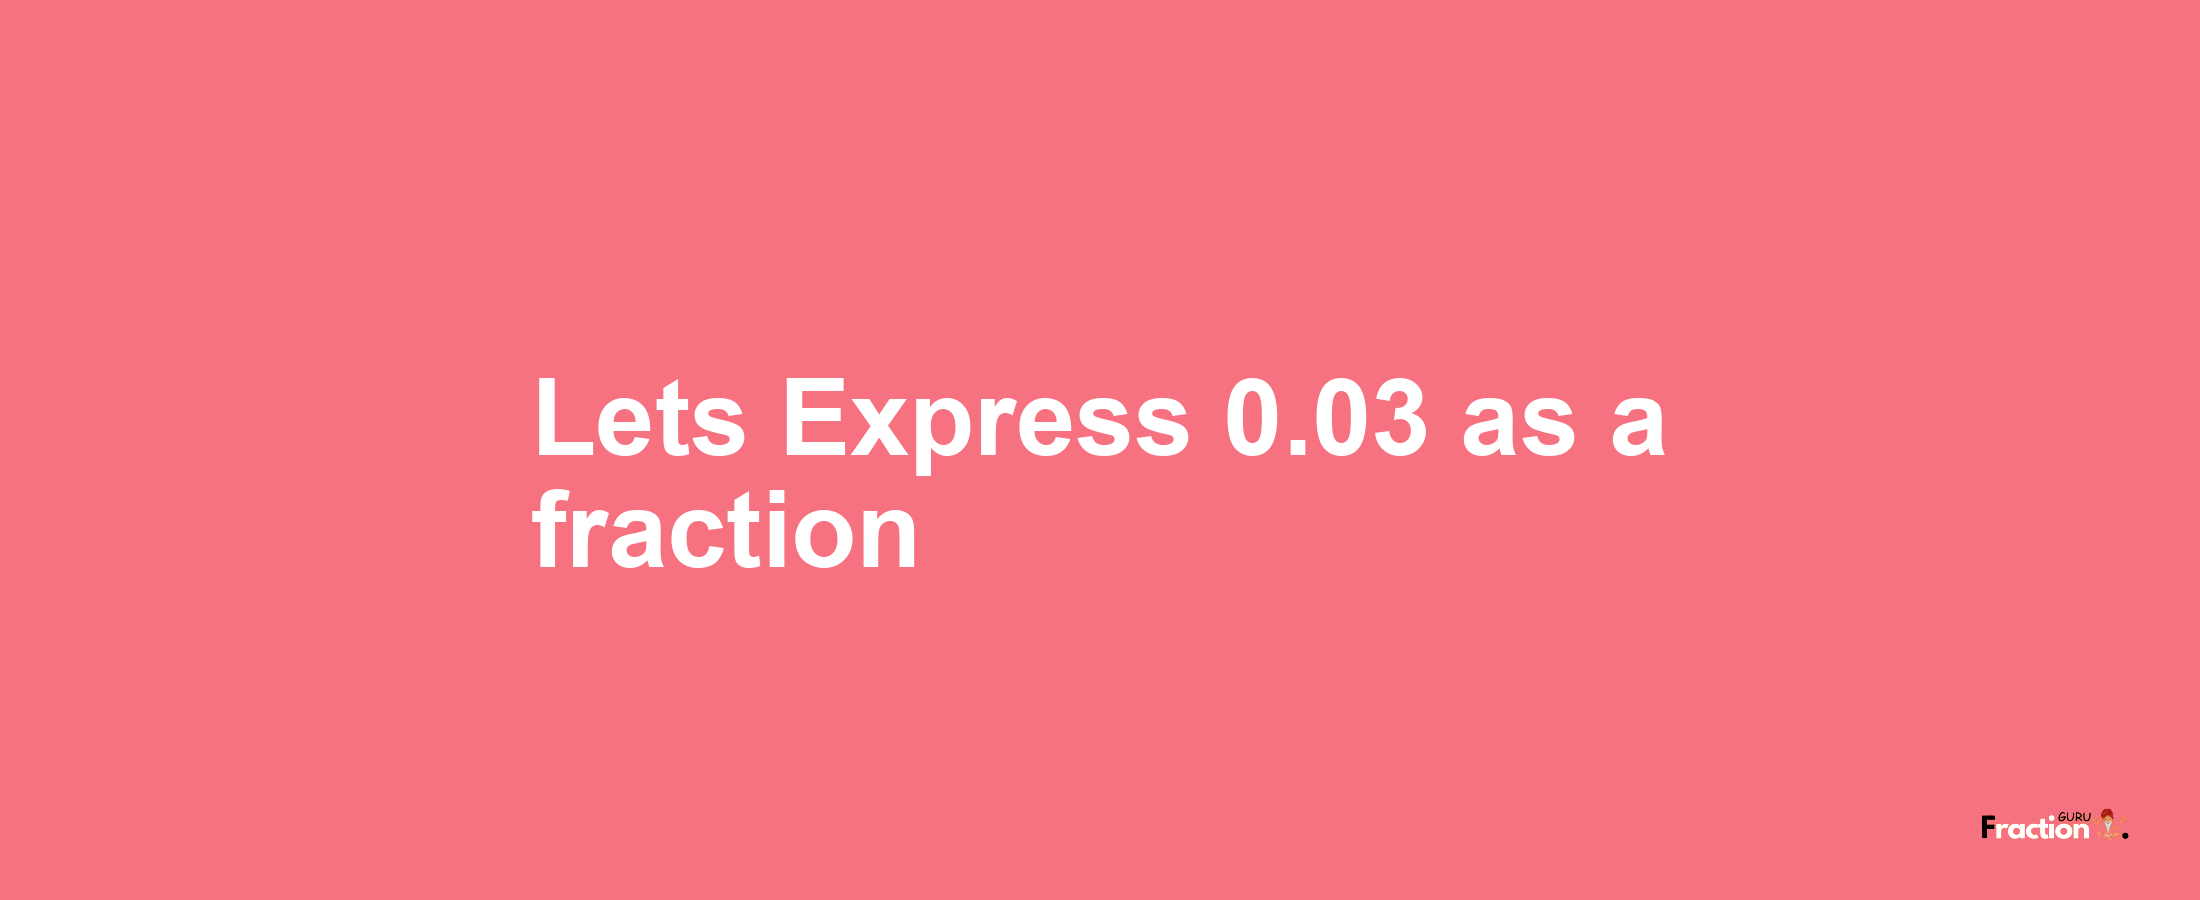 Lets Express 0.03 as afraction